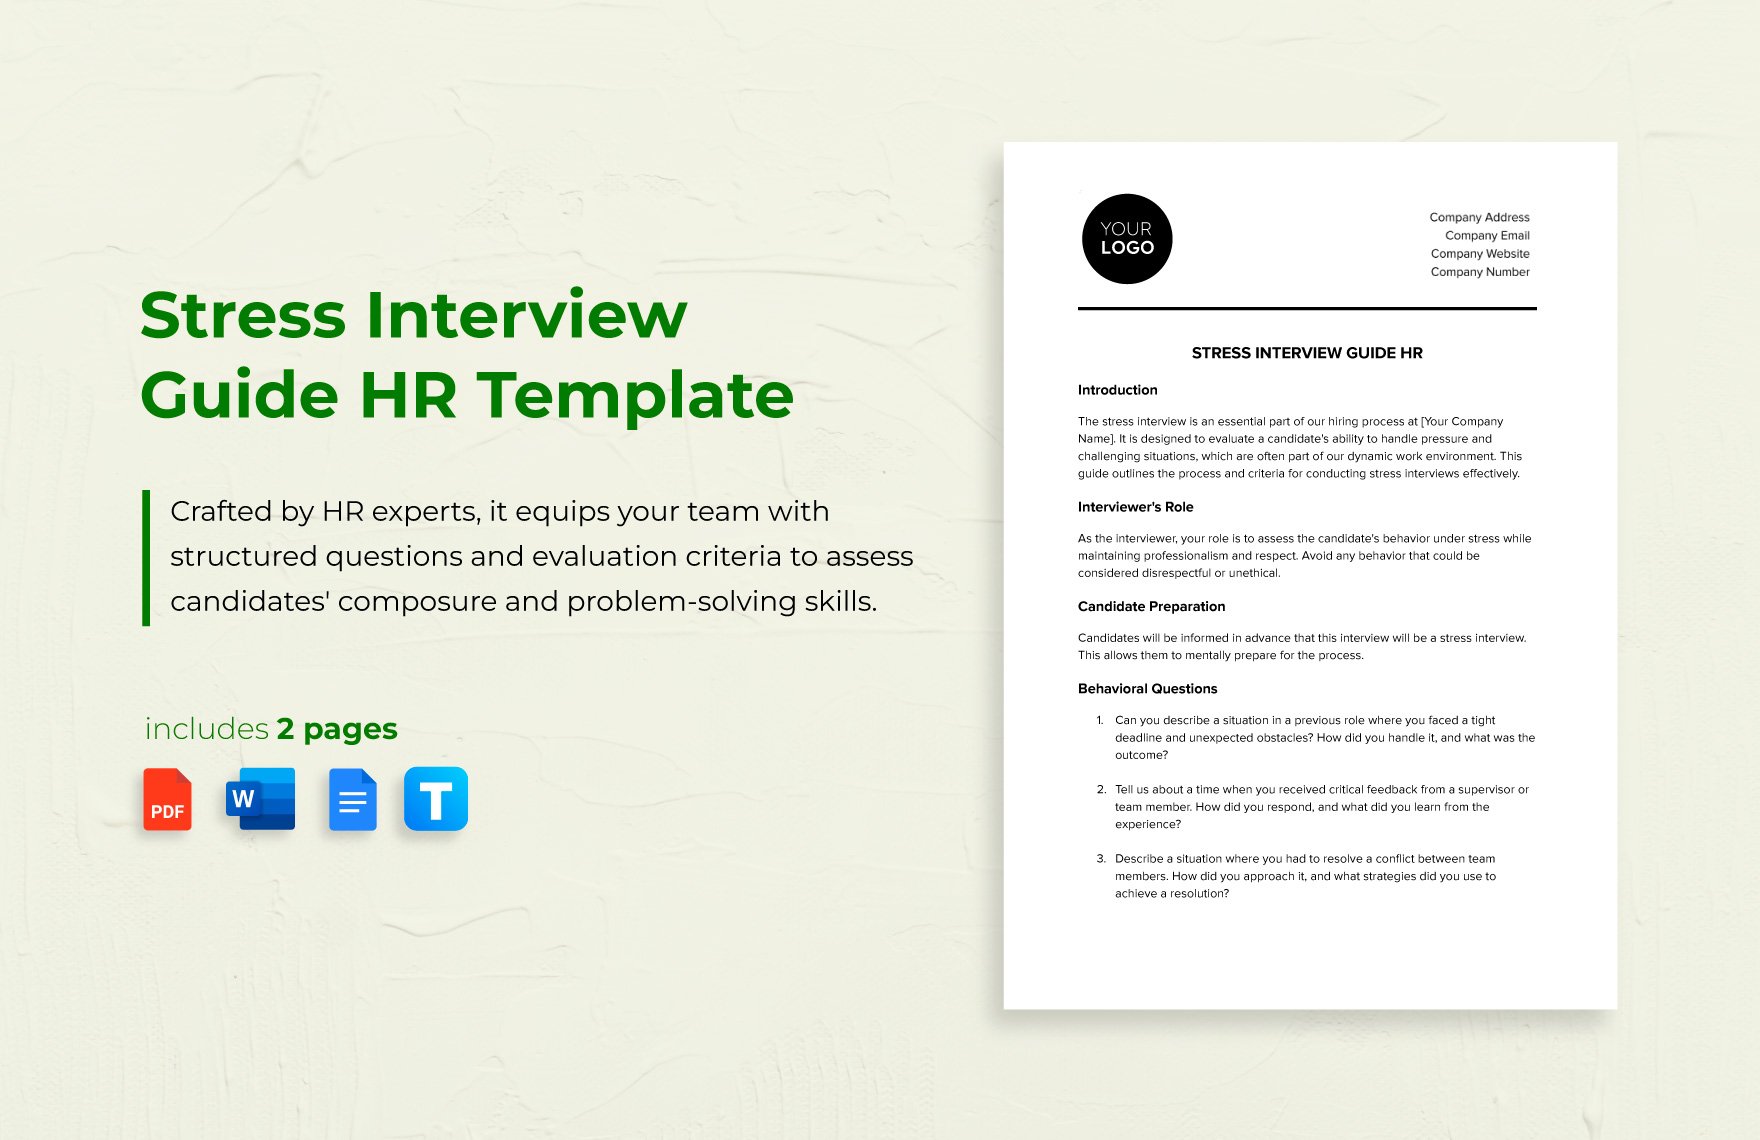 Stress Interview Guide HR Template in Word, Google Docs, PDF